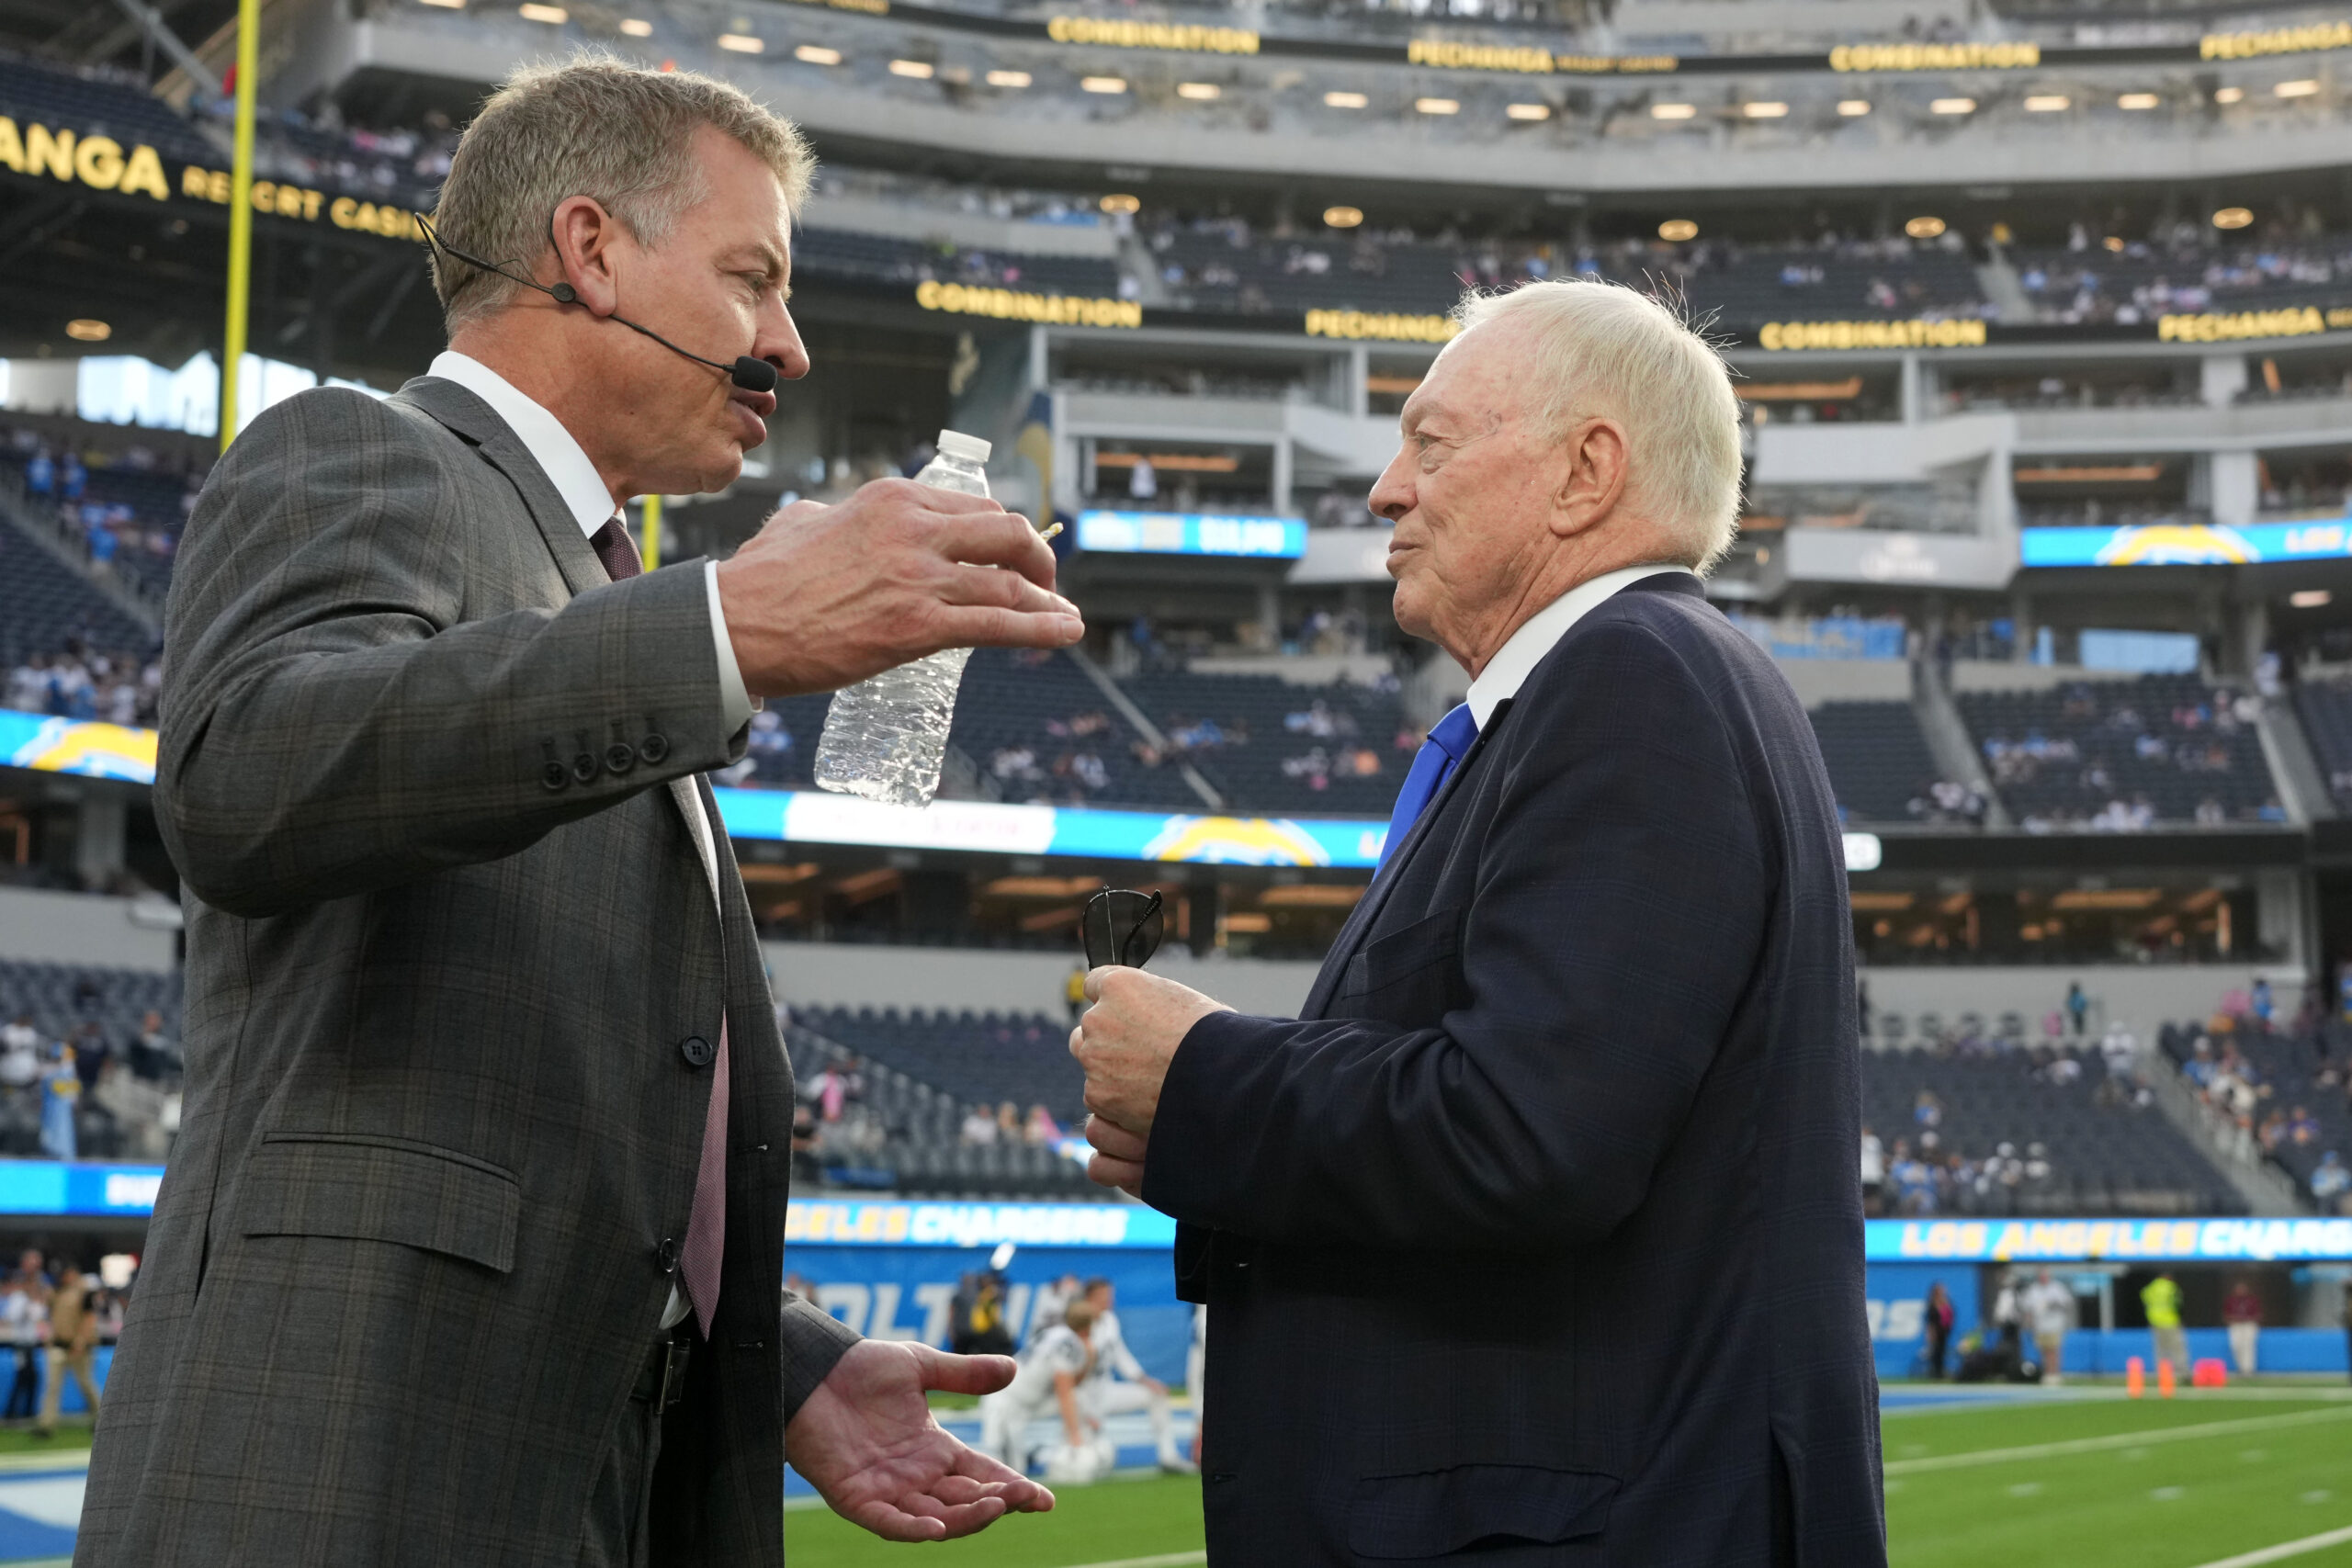 Dallas Cowboys owner Jerry Jones (right) talks with former quarterback Troy Aikman before the game against the Los Angeles Chargers at SoFi Stadium.